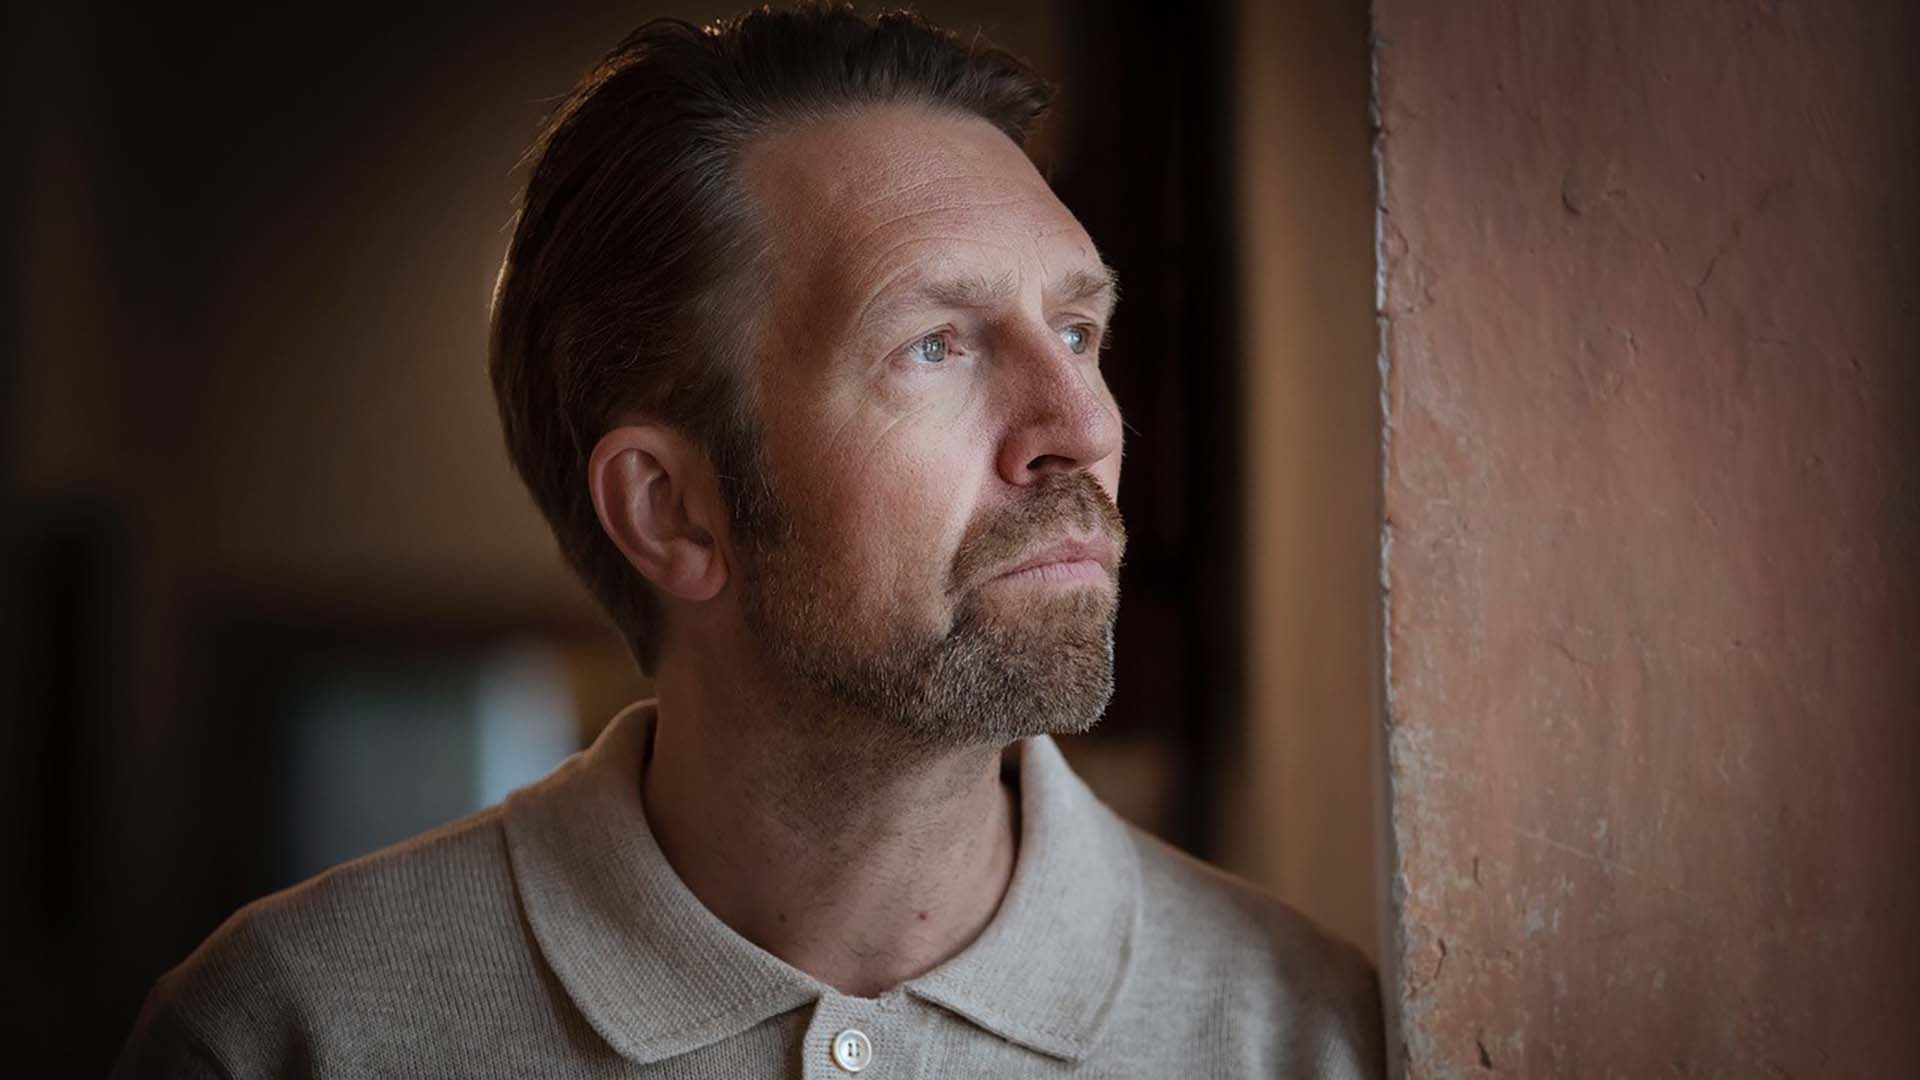 Leif Ove Andsnes portrait by Liv Ovland